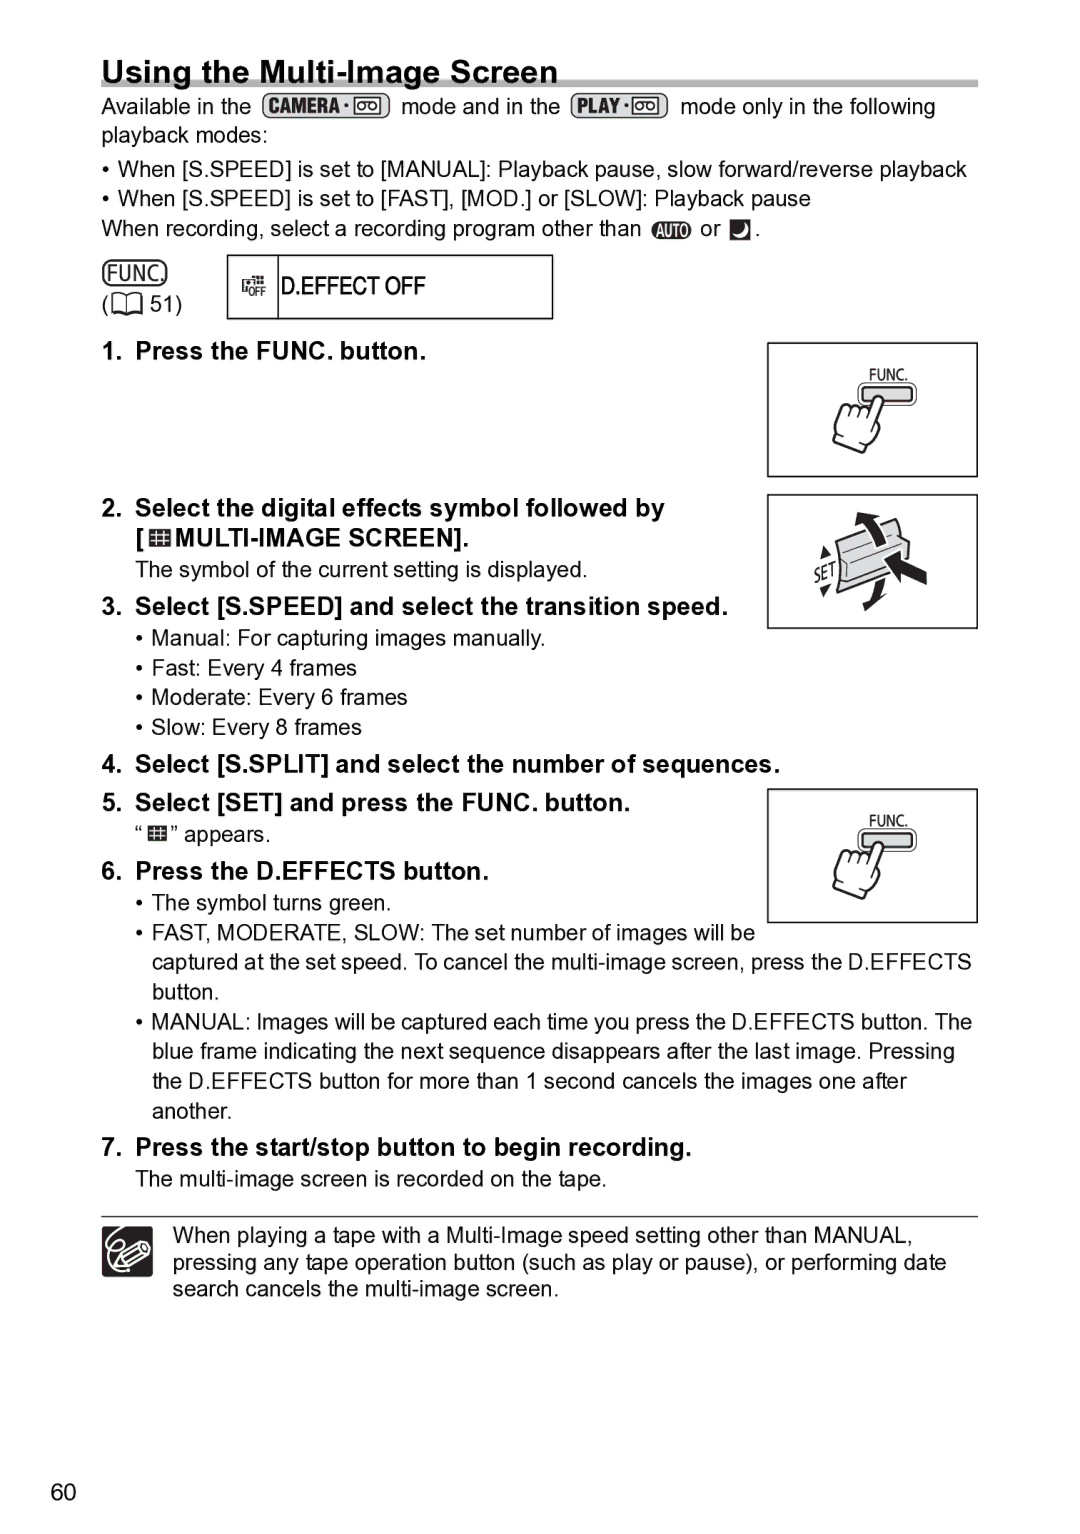 Canon S1 instruction manual Using the Multi-Image Screen, Select S.SPEED and select the transition speed 